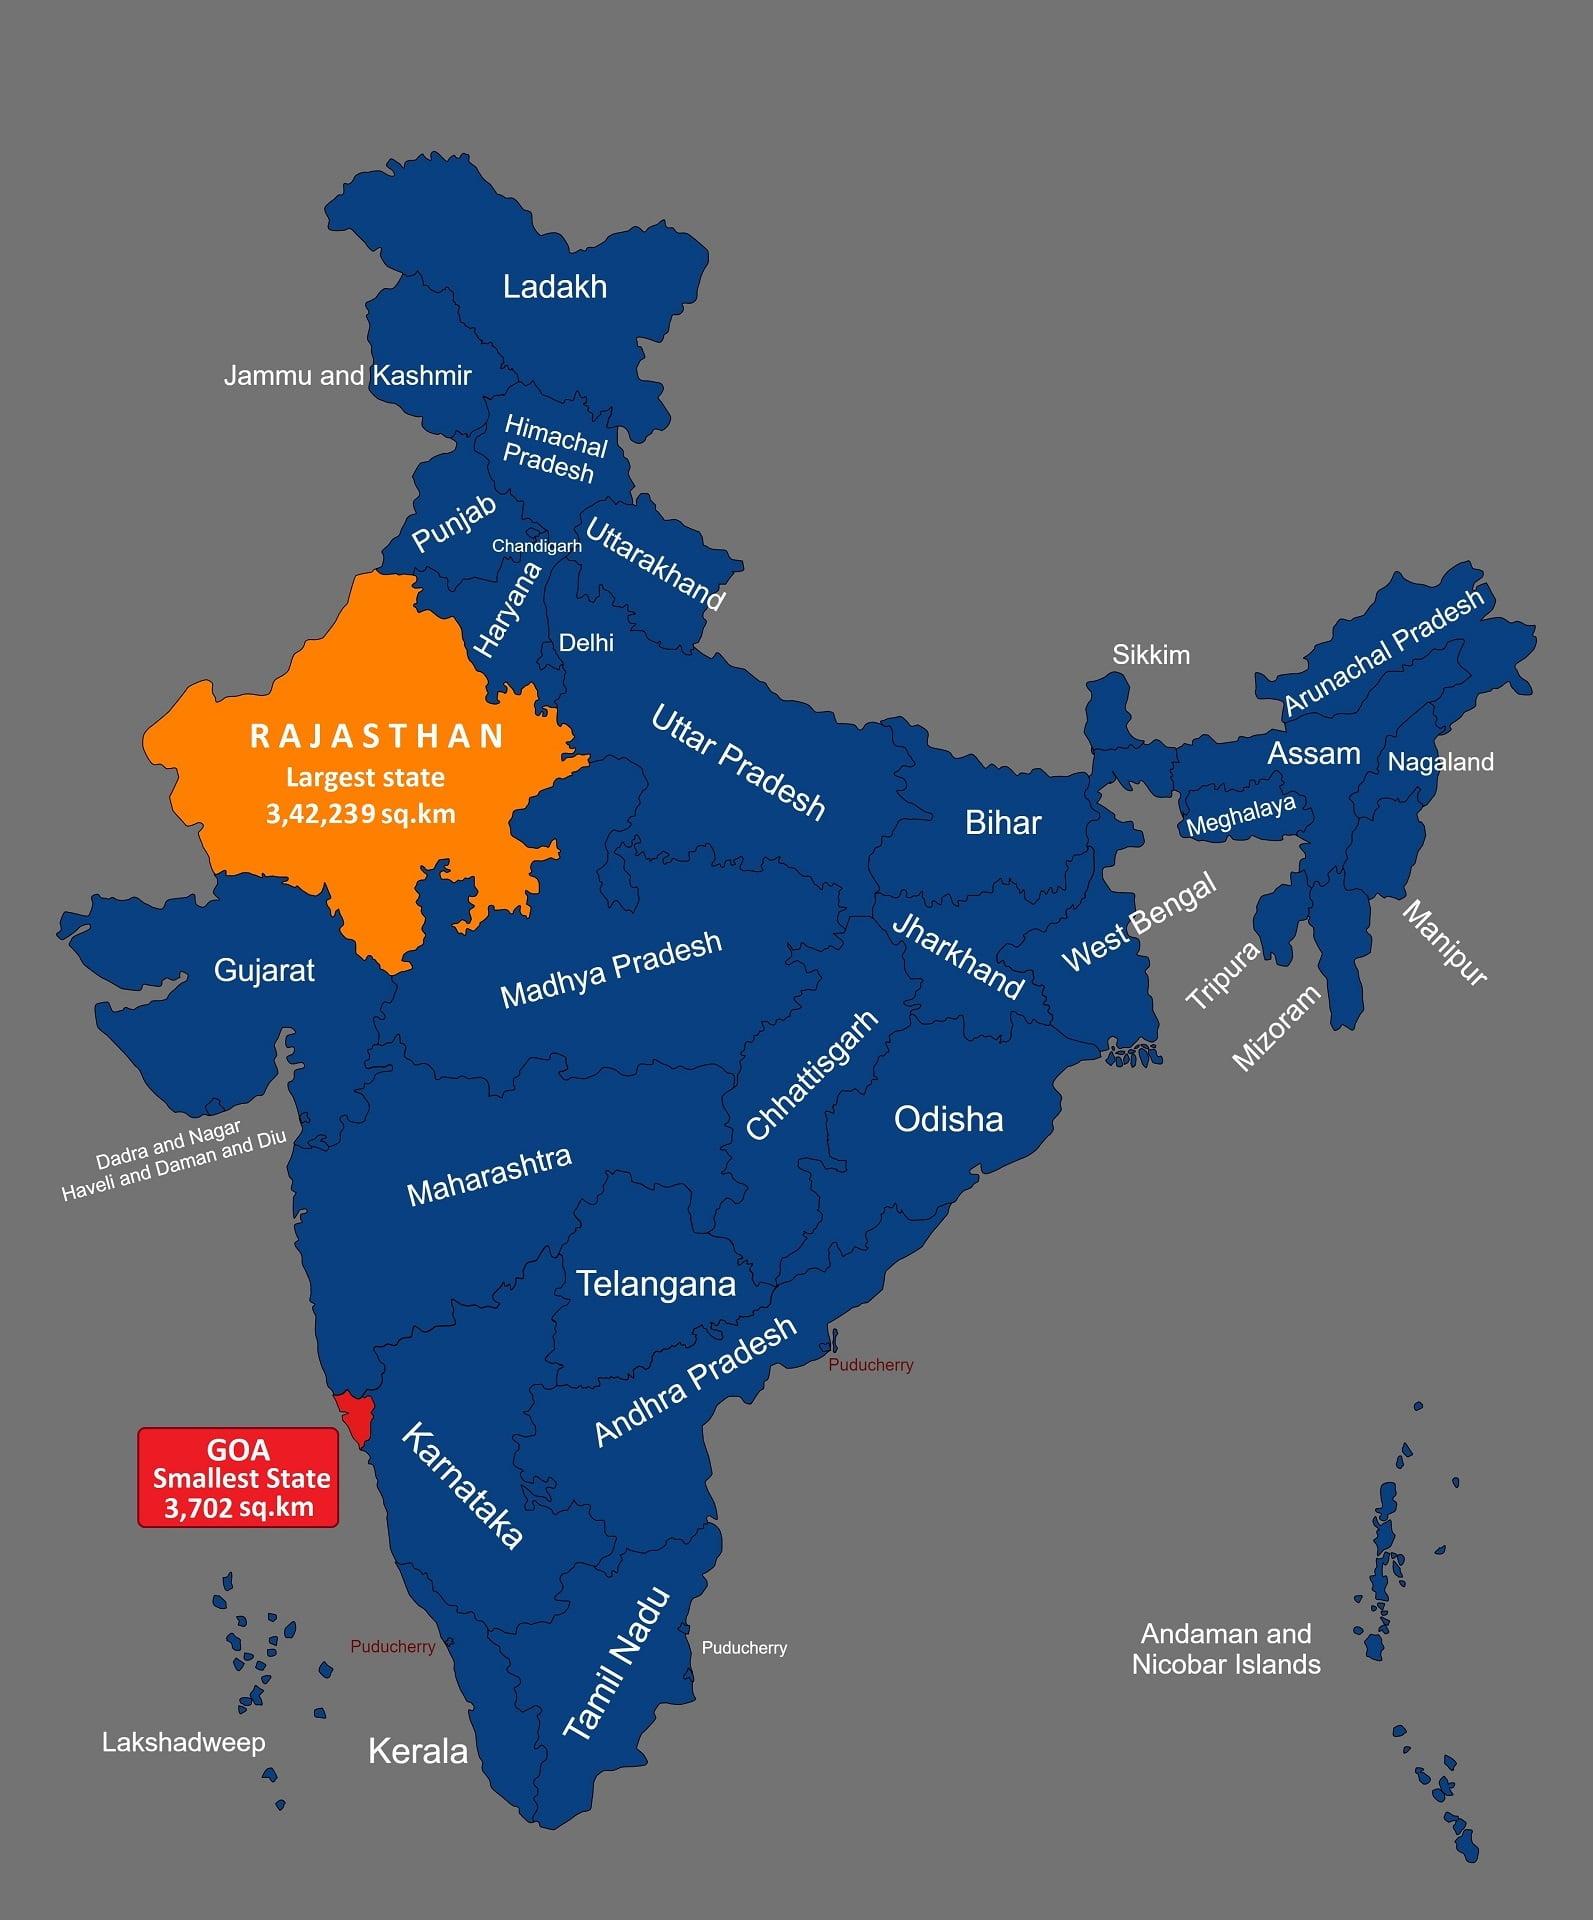 Largest State in India by Area and Population_40.1